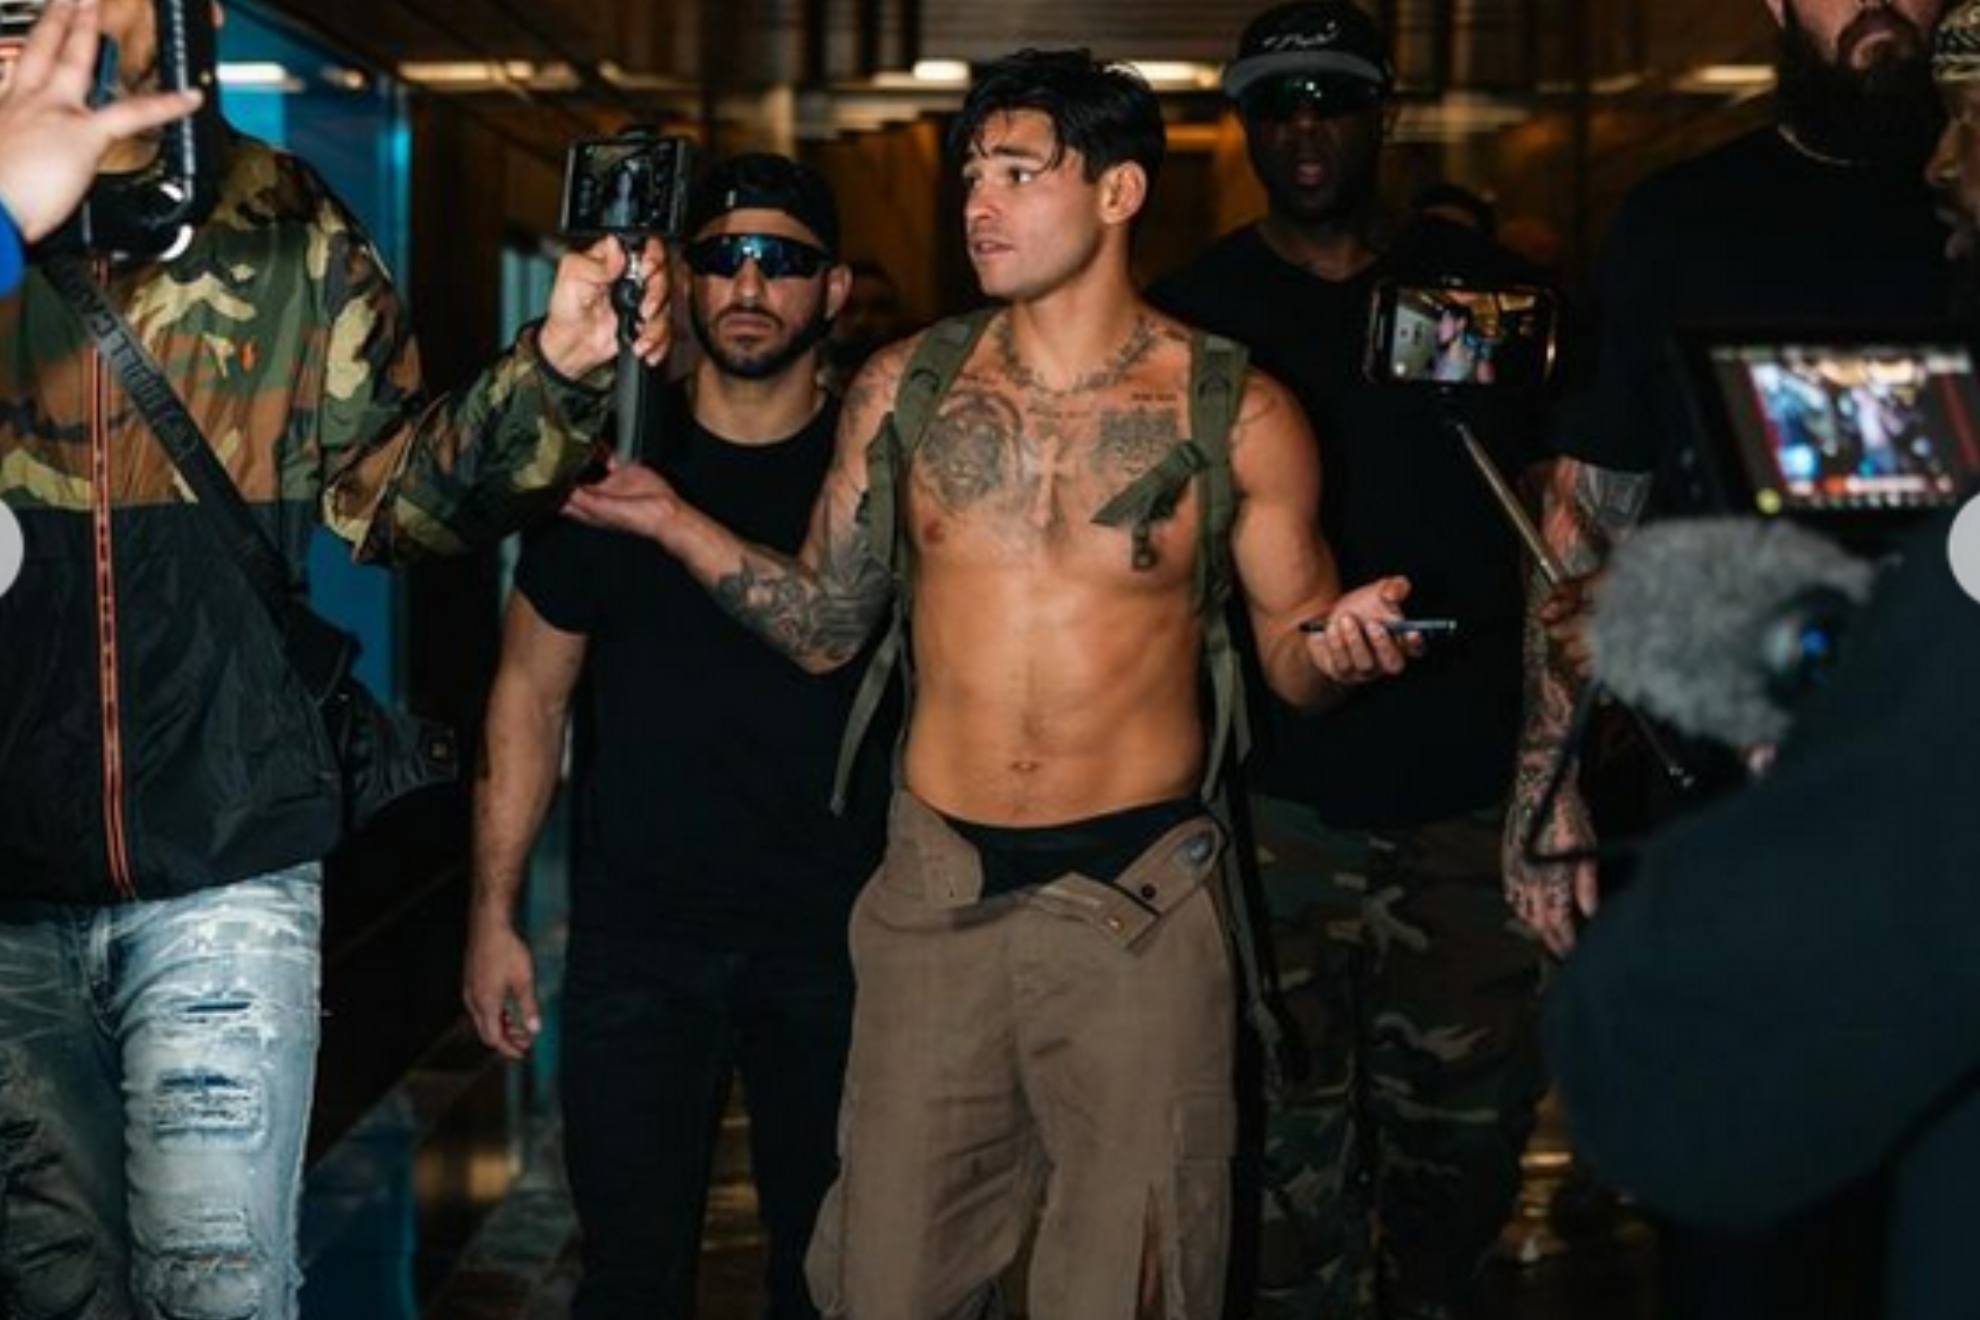 Ryan Garcia arriving at the last press conference before the fight.